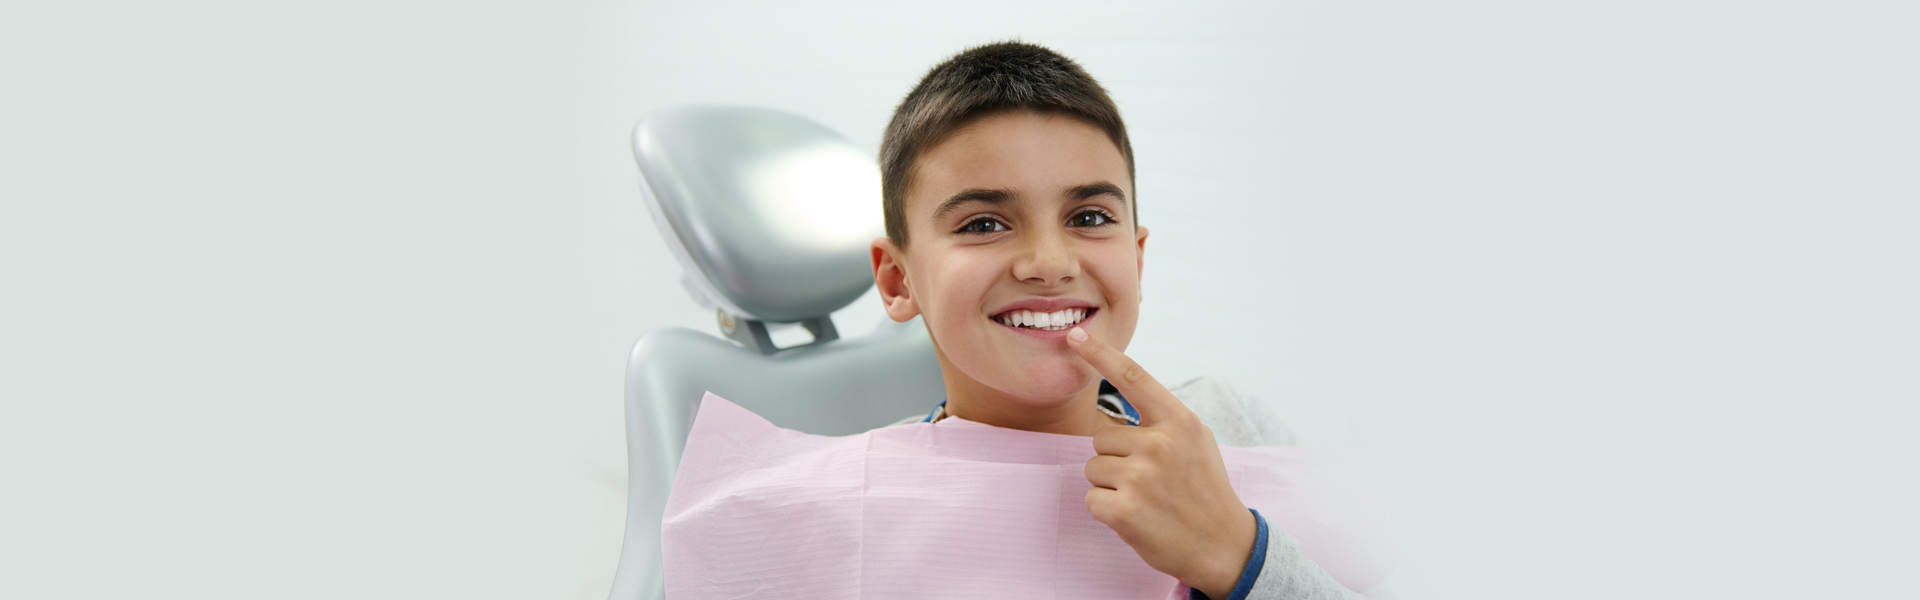 Why Are Dental Sealants Important for Kids?